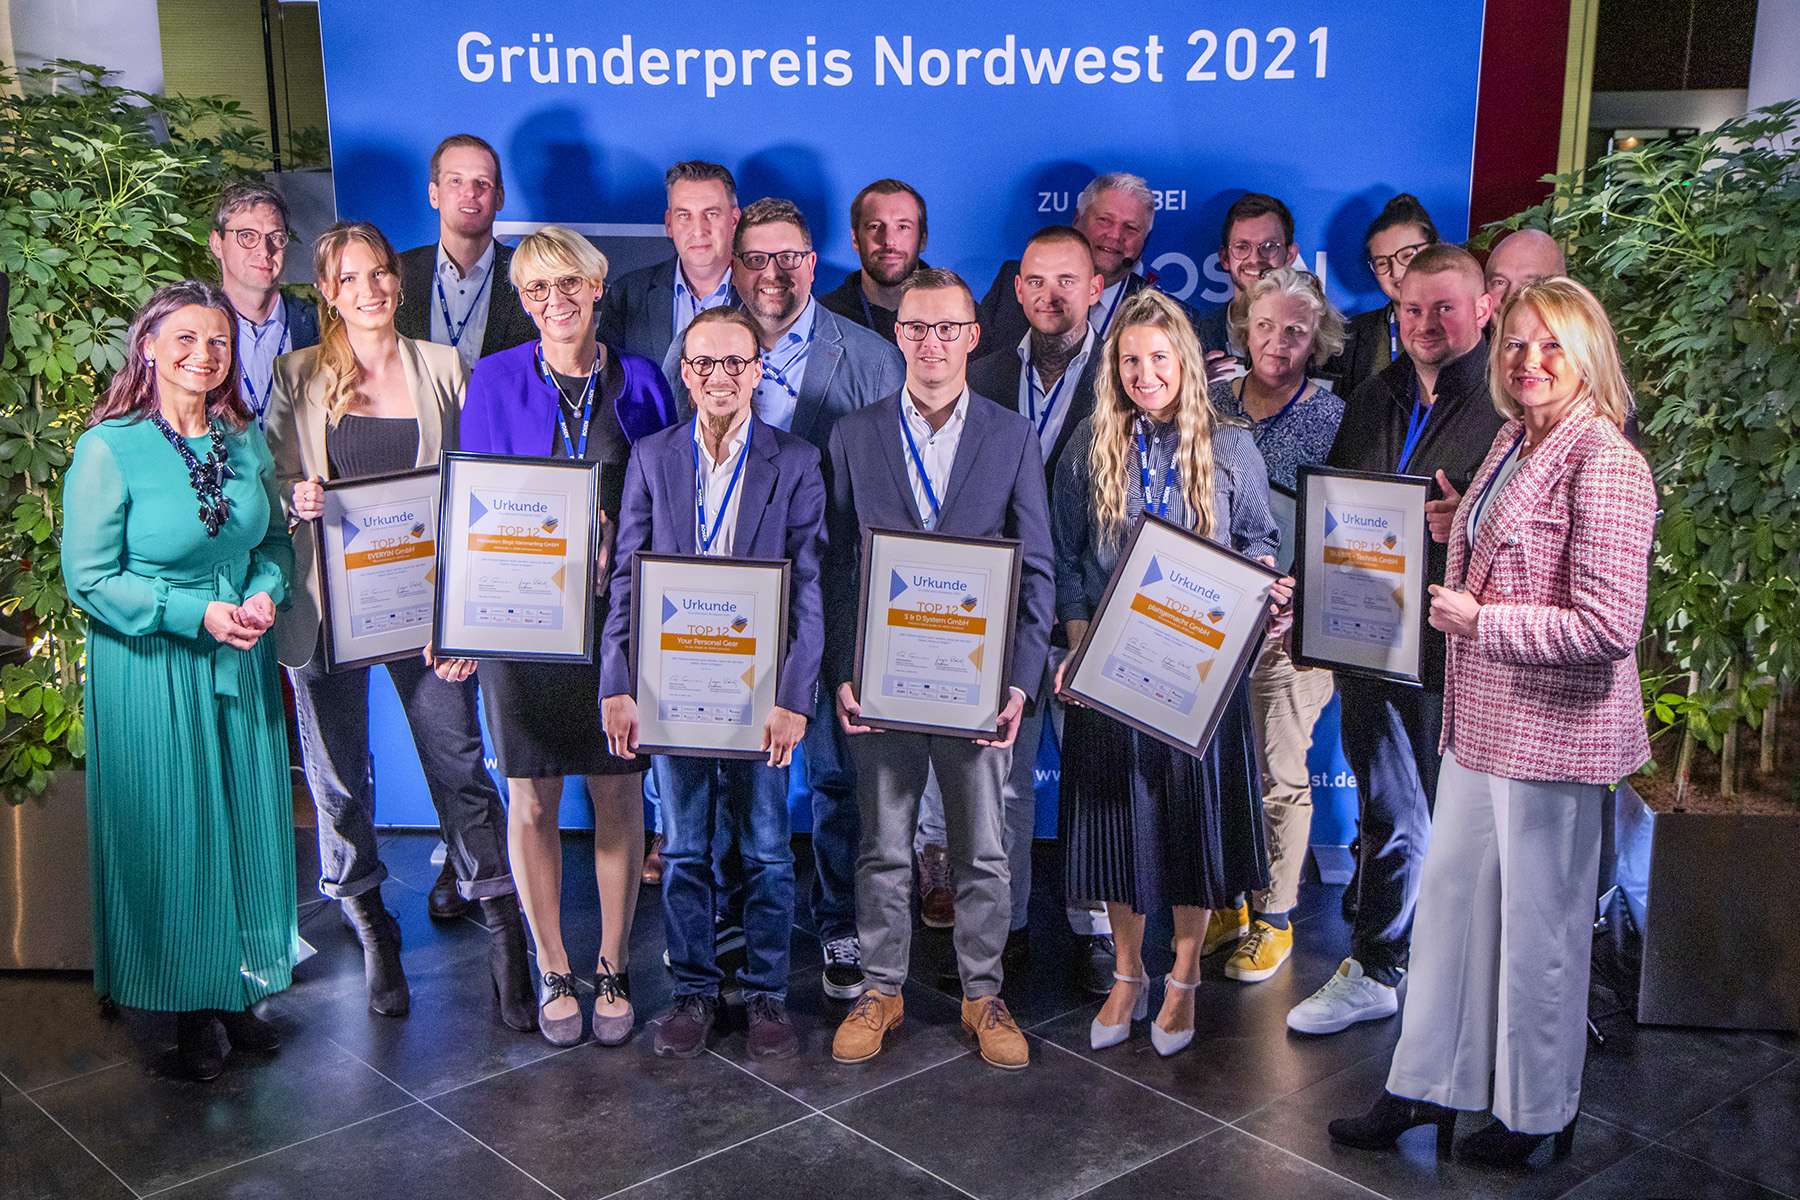 Gründerpreis Nordwest 2021: ROSEN hosted the event in Lingen (Ems) and was part of the award jury